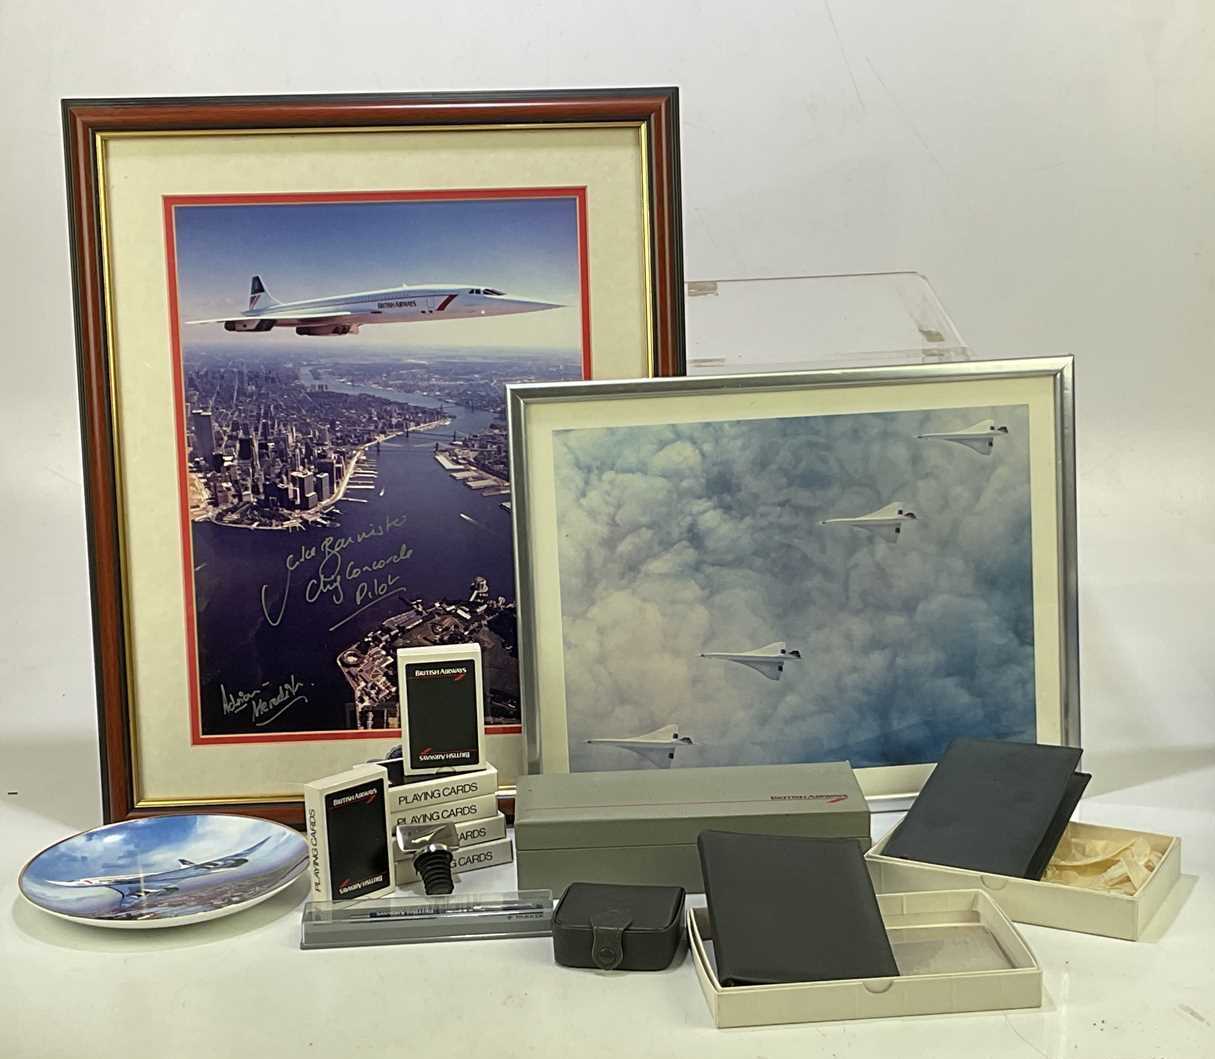 CONCORDE INTEREST; a collection of memorabilia, including a large signed framed picture of